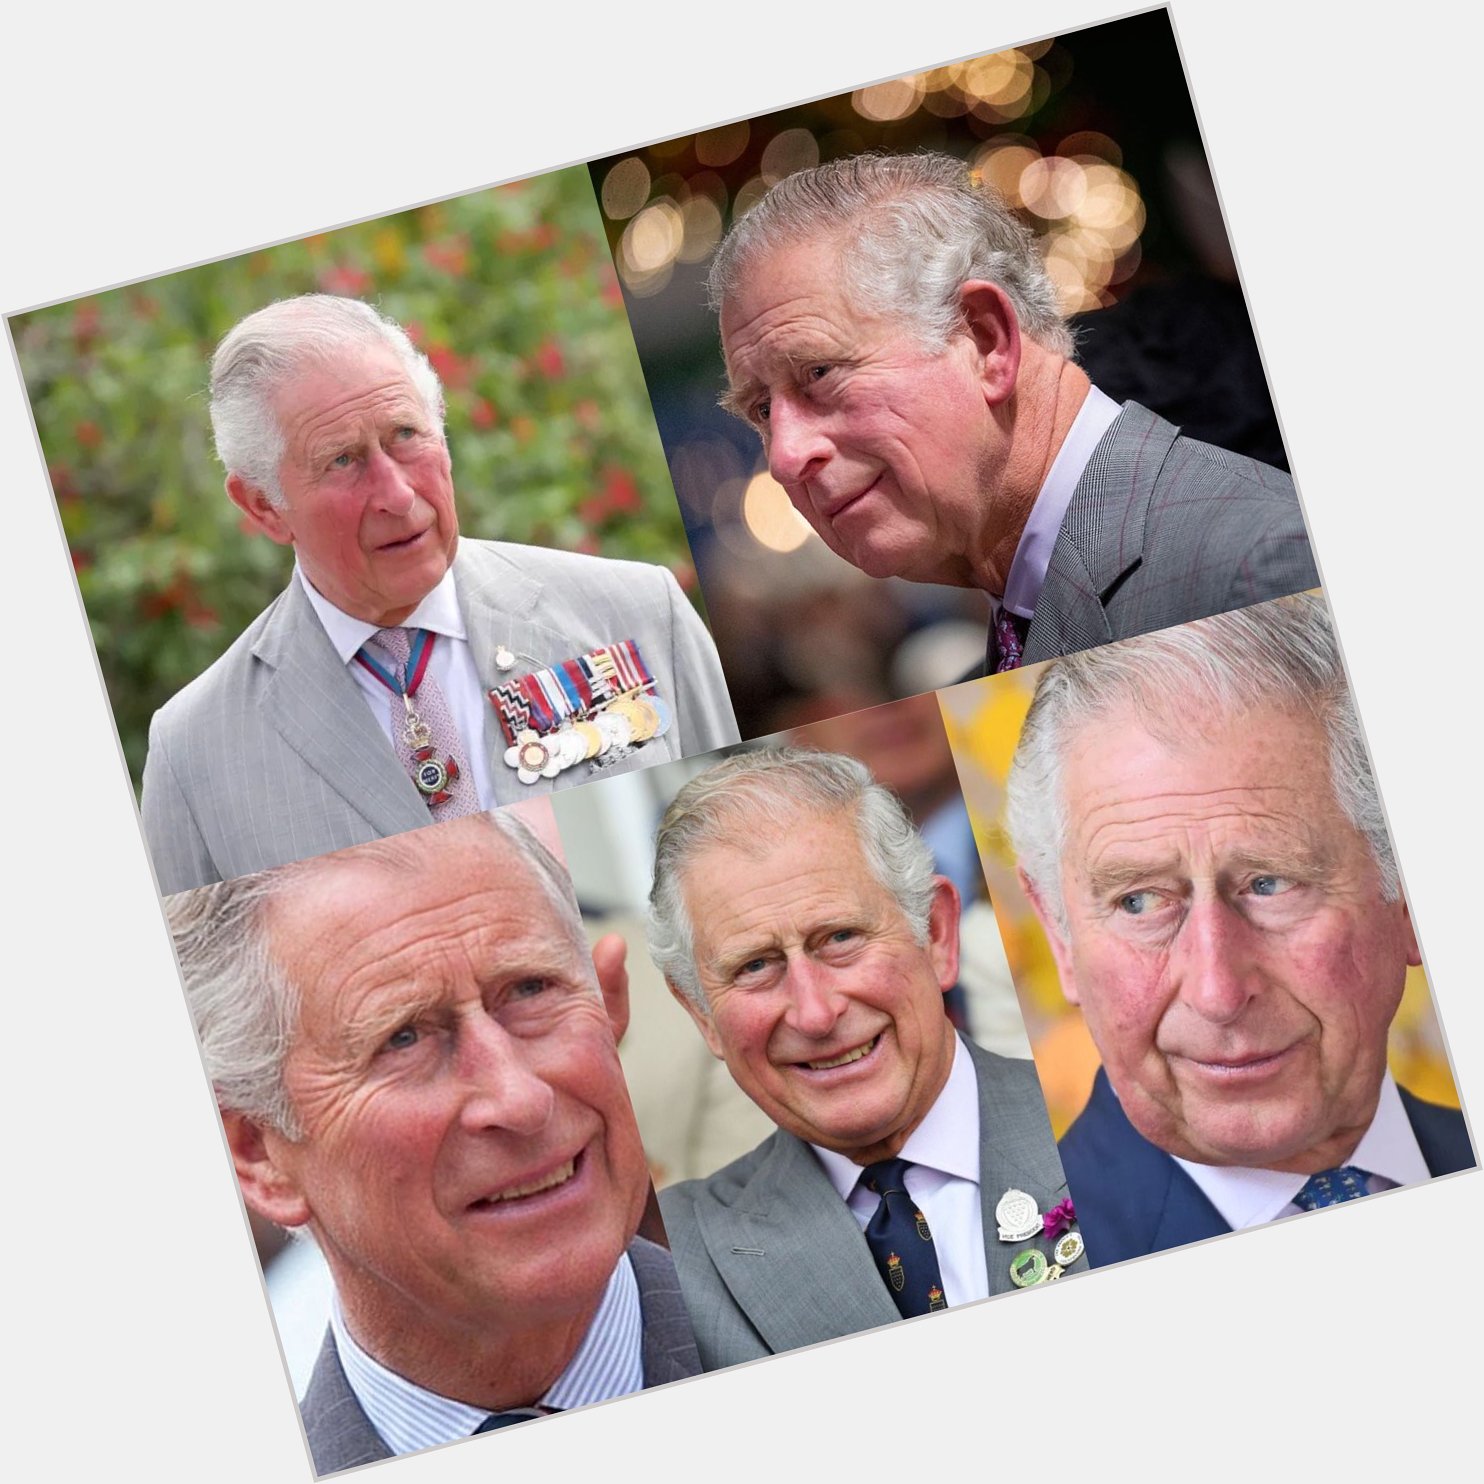 Happy 72 birthday to Prince Charles. Hope that he has a wonderful birthday.         